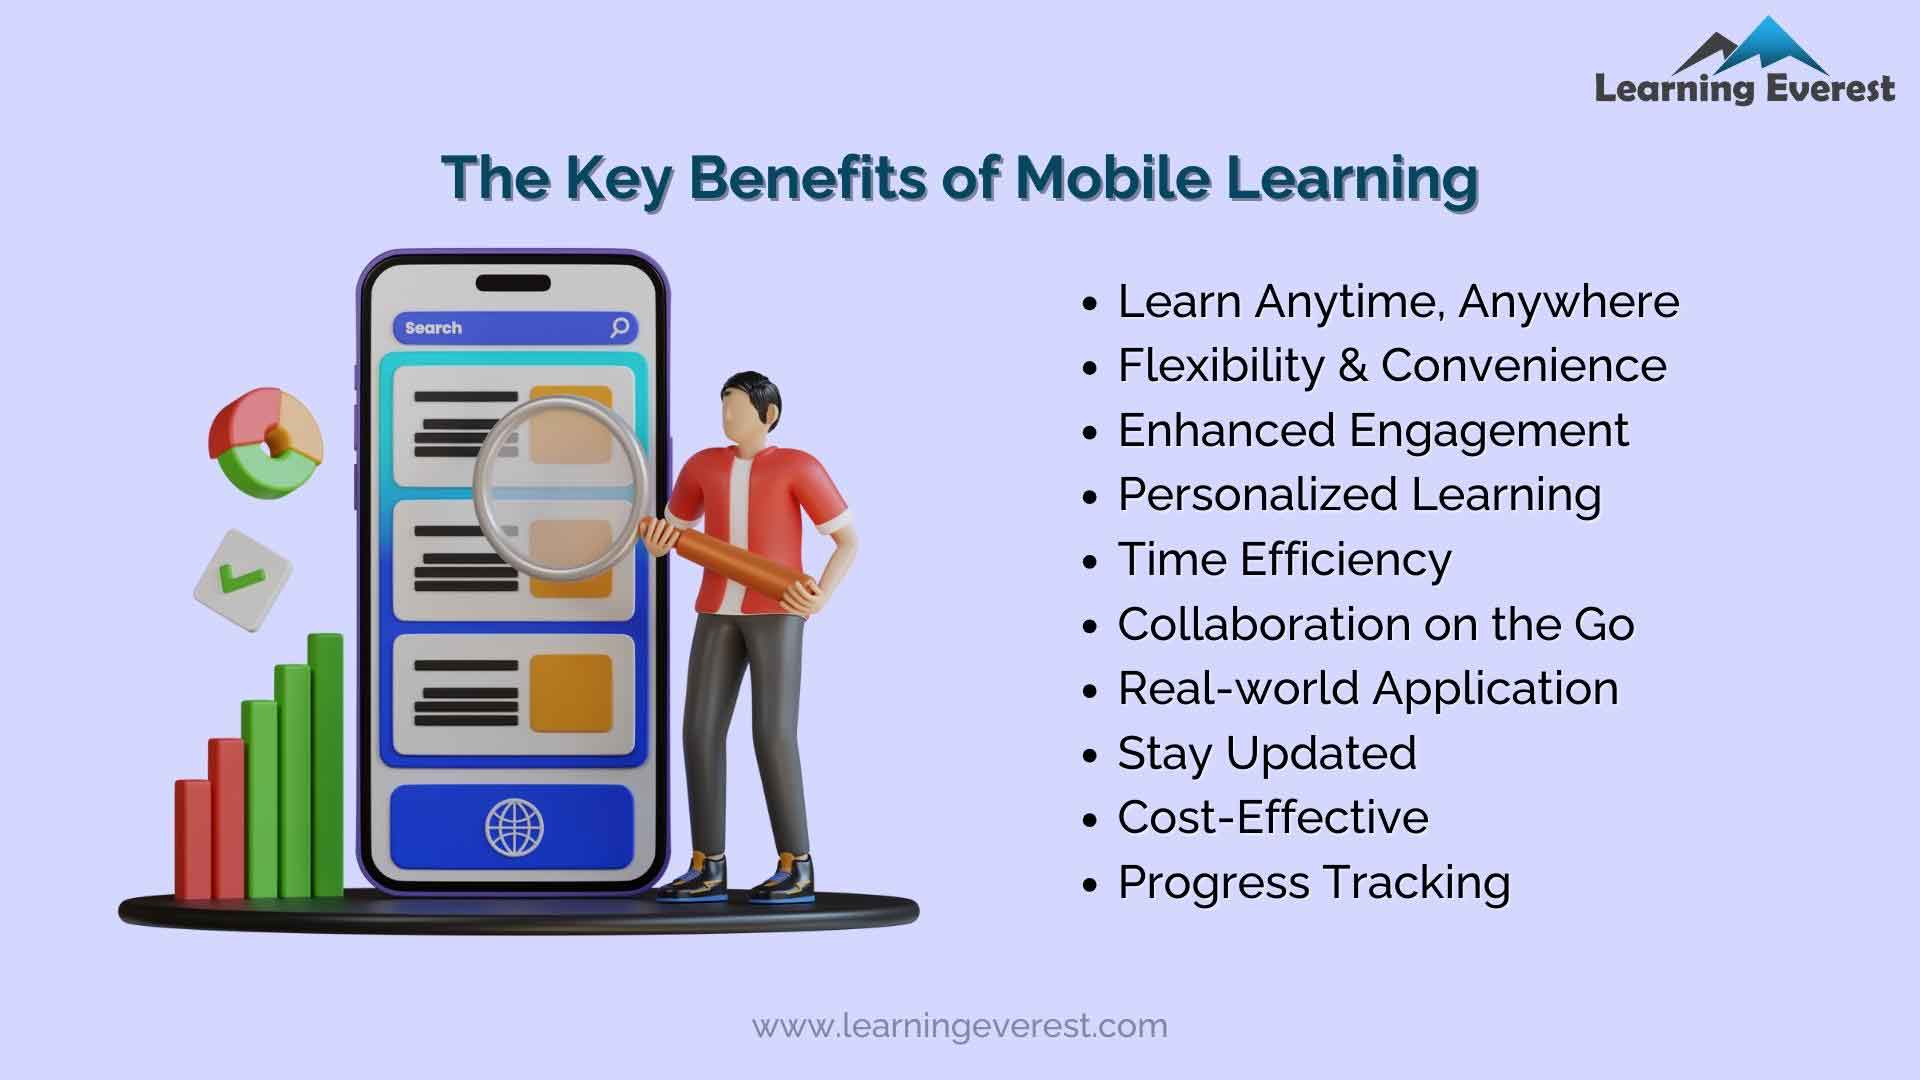 Requirements for eLearning - The Key Benefits of Mobile Learning